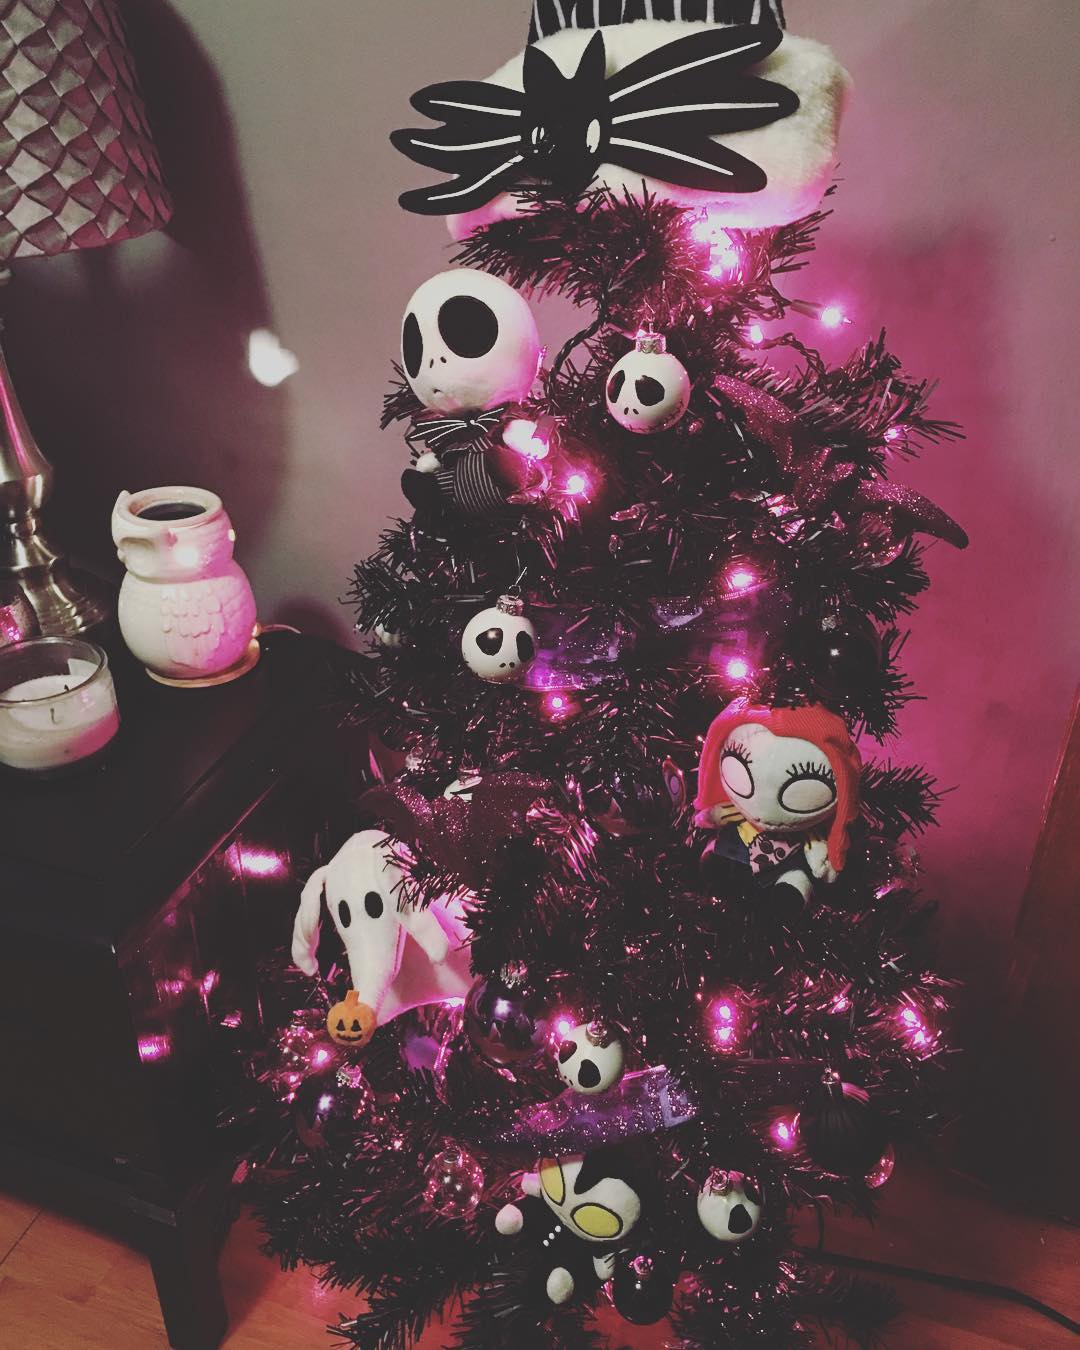 14 Halloween trees for people who already got bored of Christmas